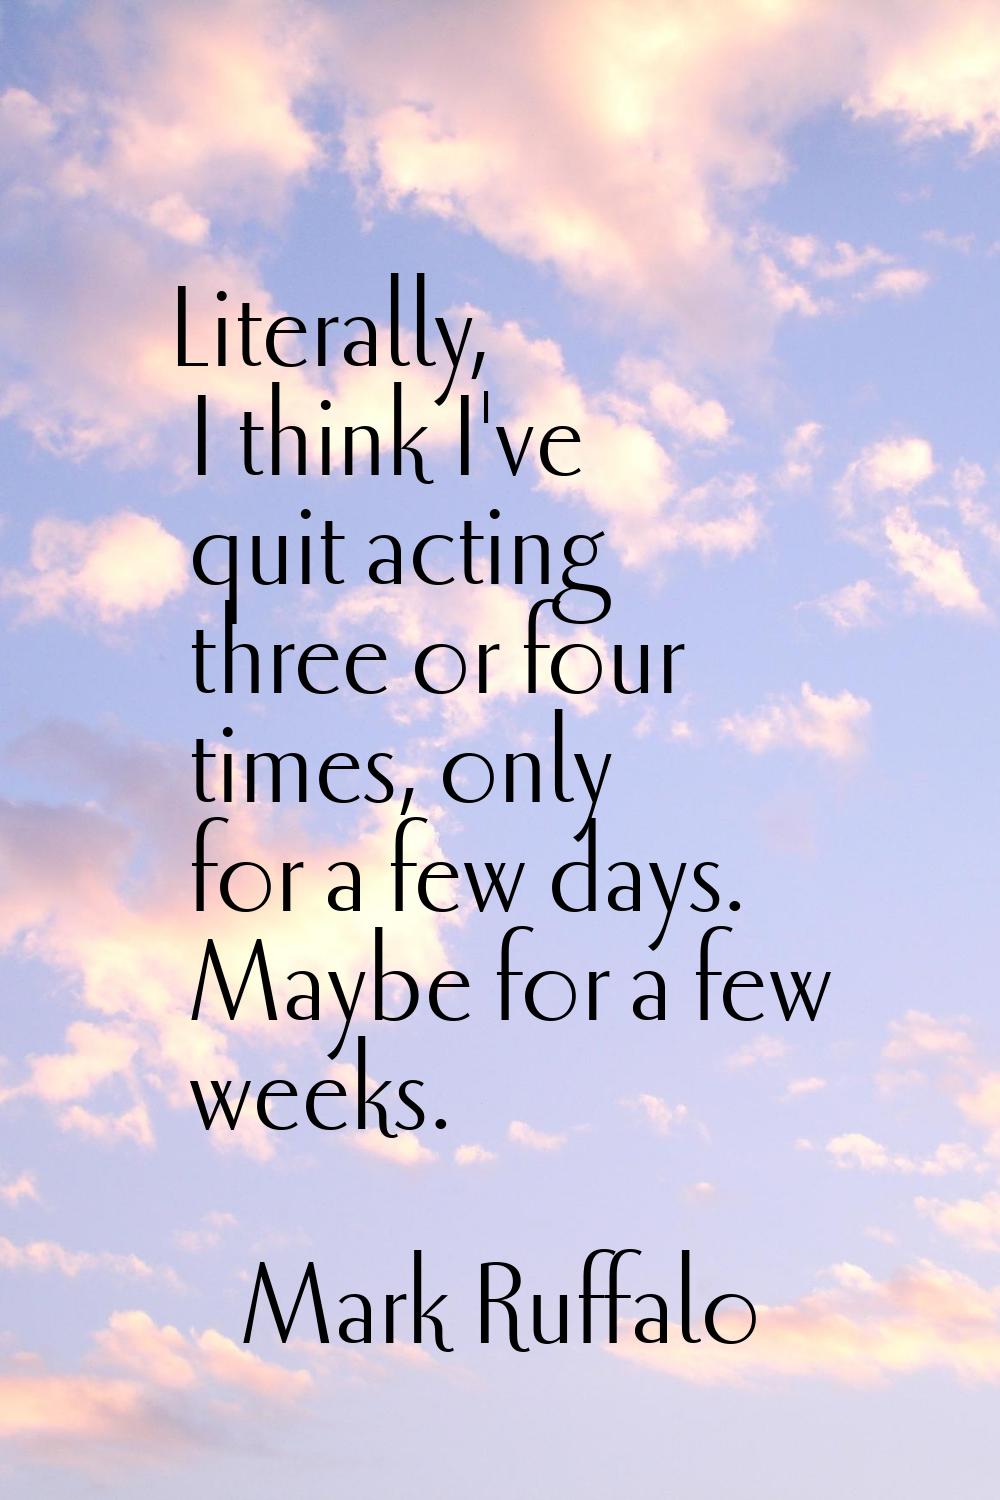 Literally, I think I've quit acting three or four times, only for a few days. Maybe for a few weeks